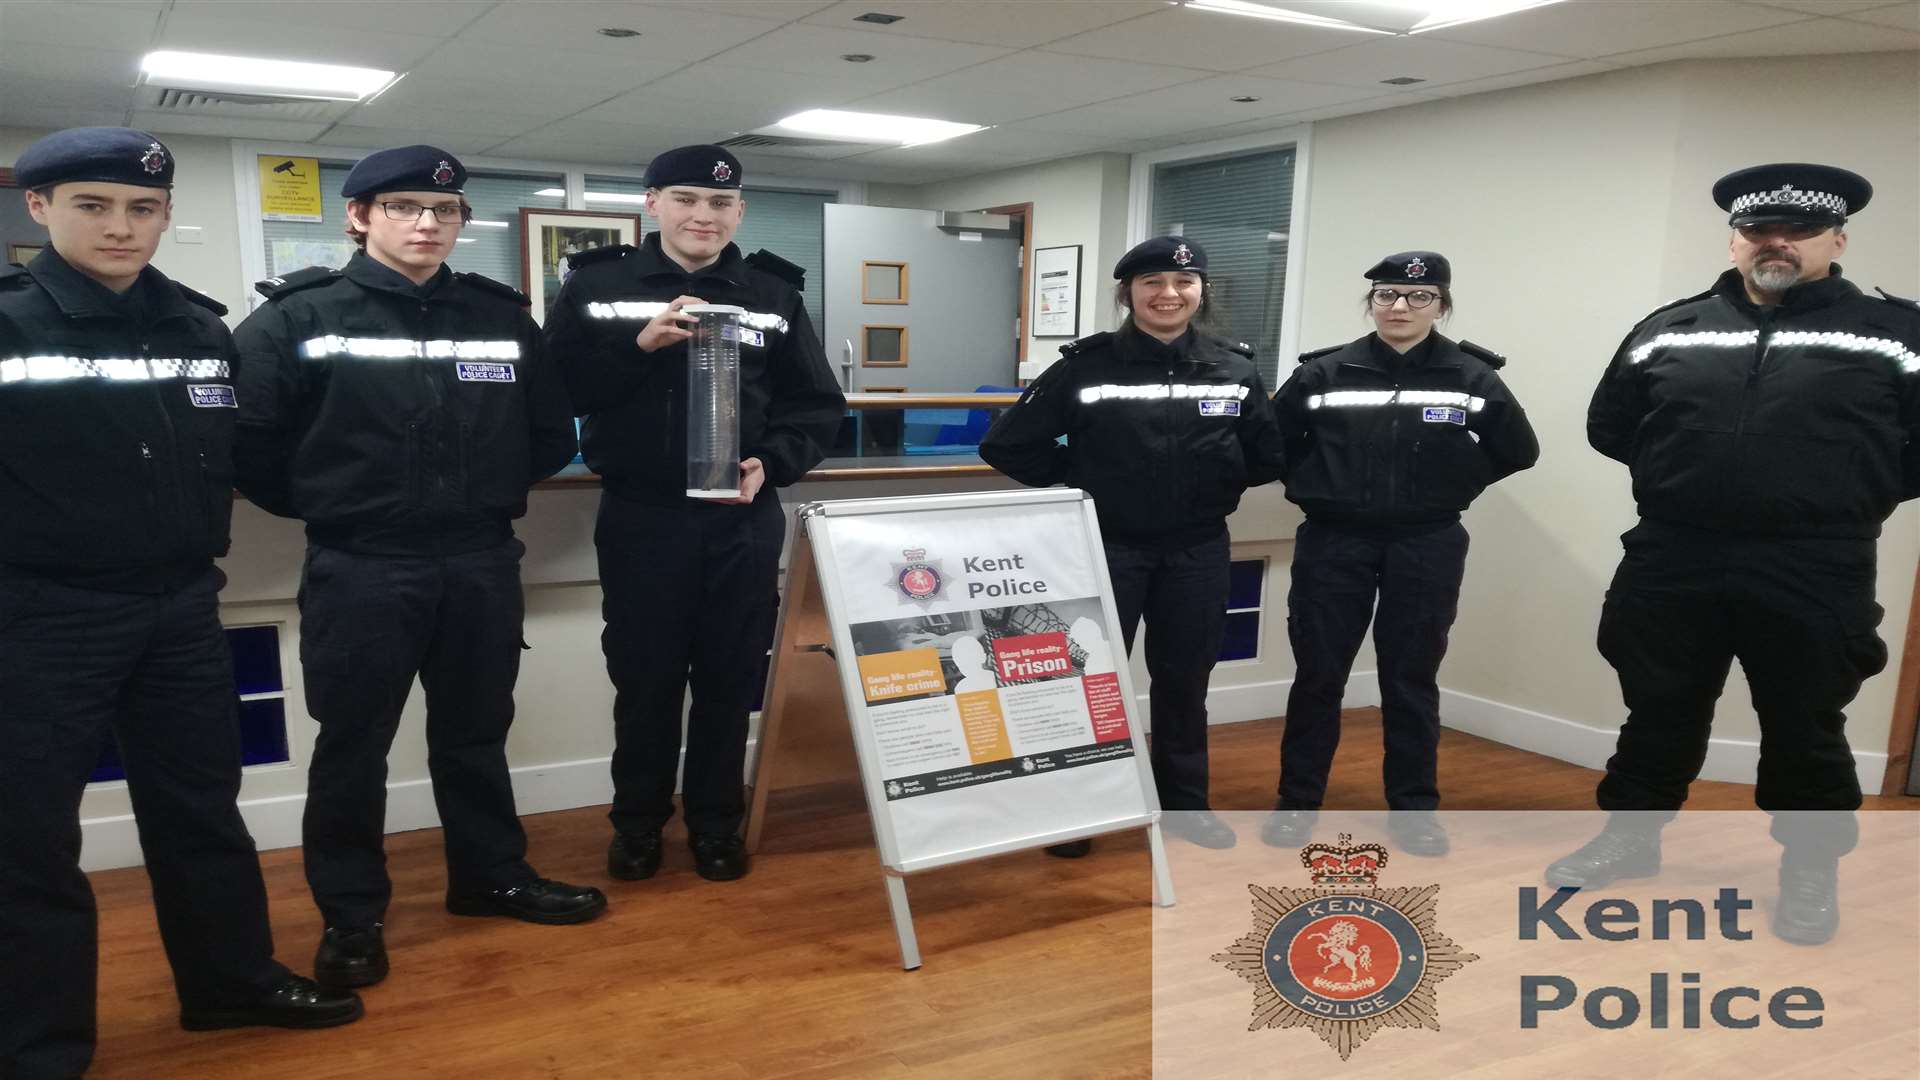 Chief Inspector Andrew Somerville (far right) with some of the cadets. Credit: Kent Police